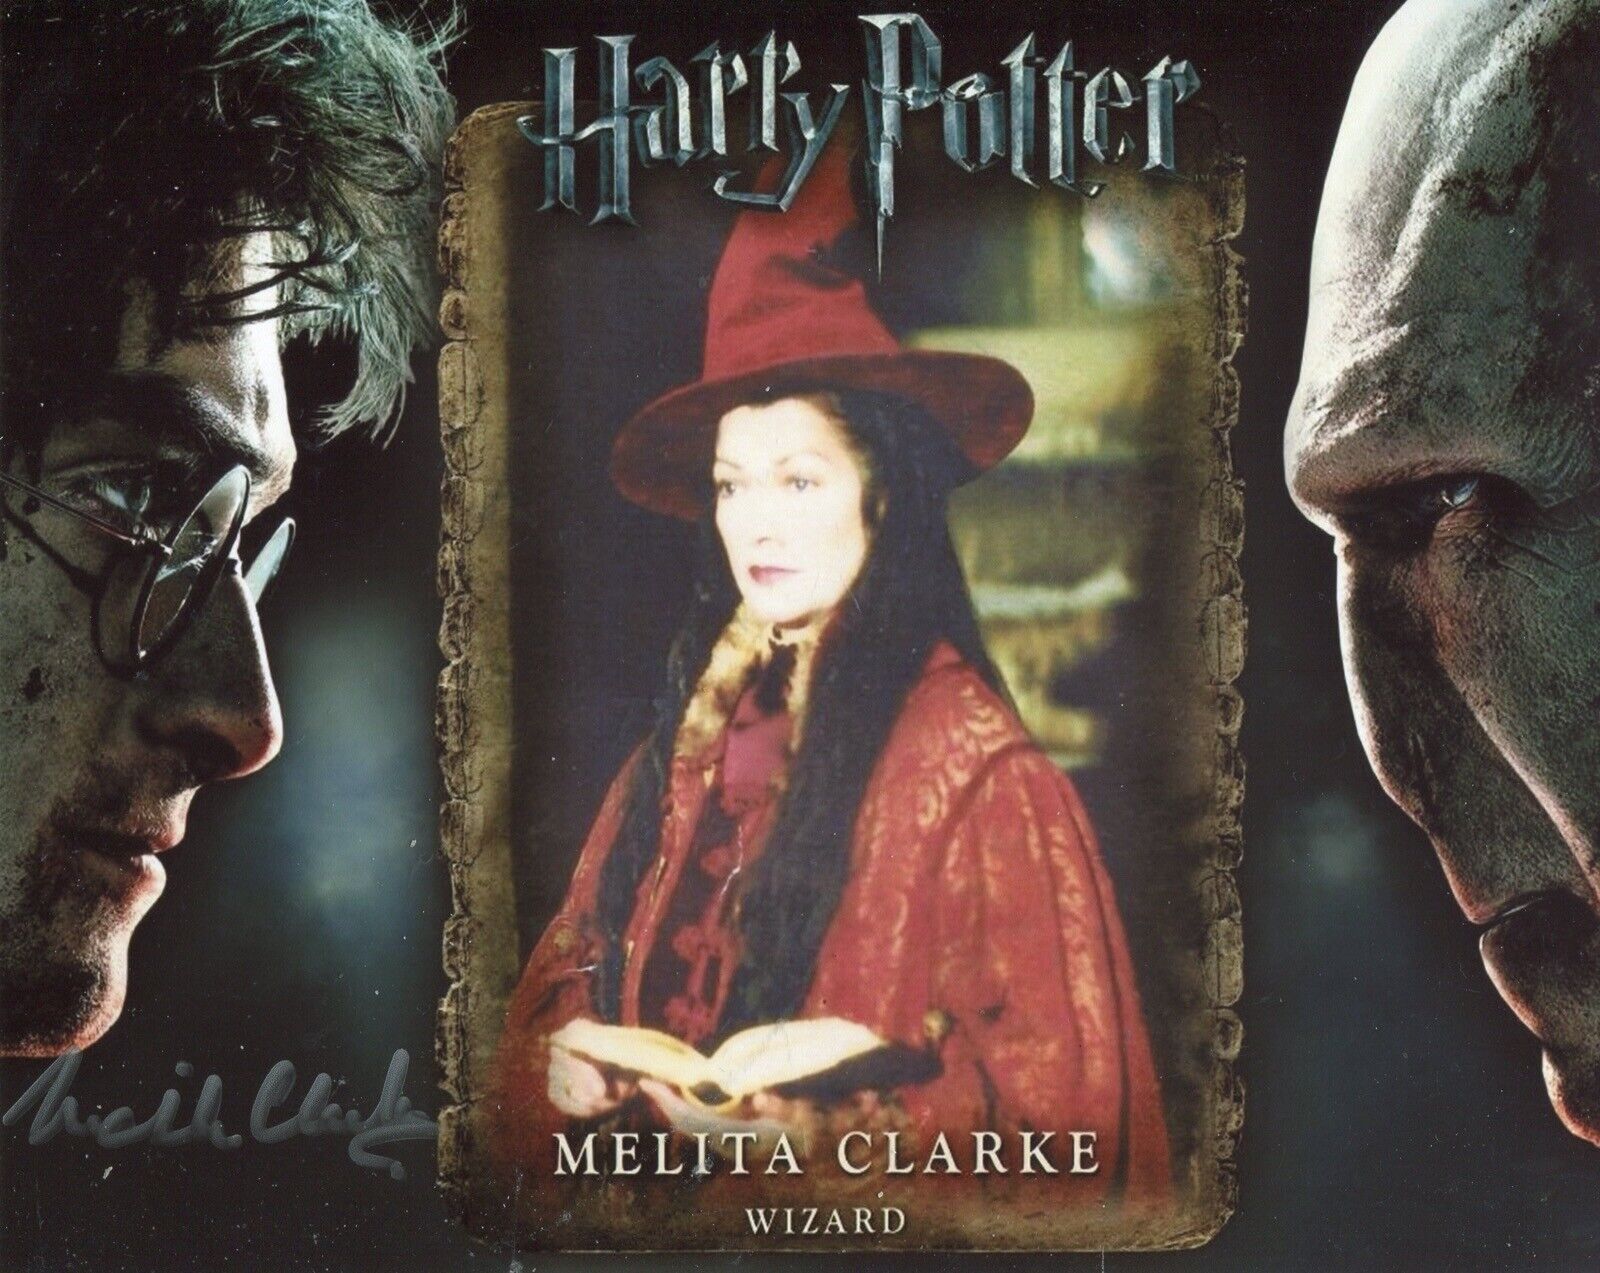 HARRY POTTER & THE PHILOSOPHER’S STONE movie Photo Poster painting signed by Melita Clarke